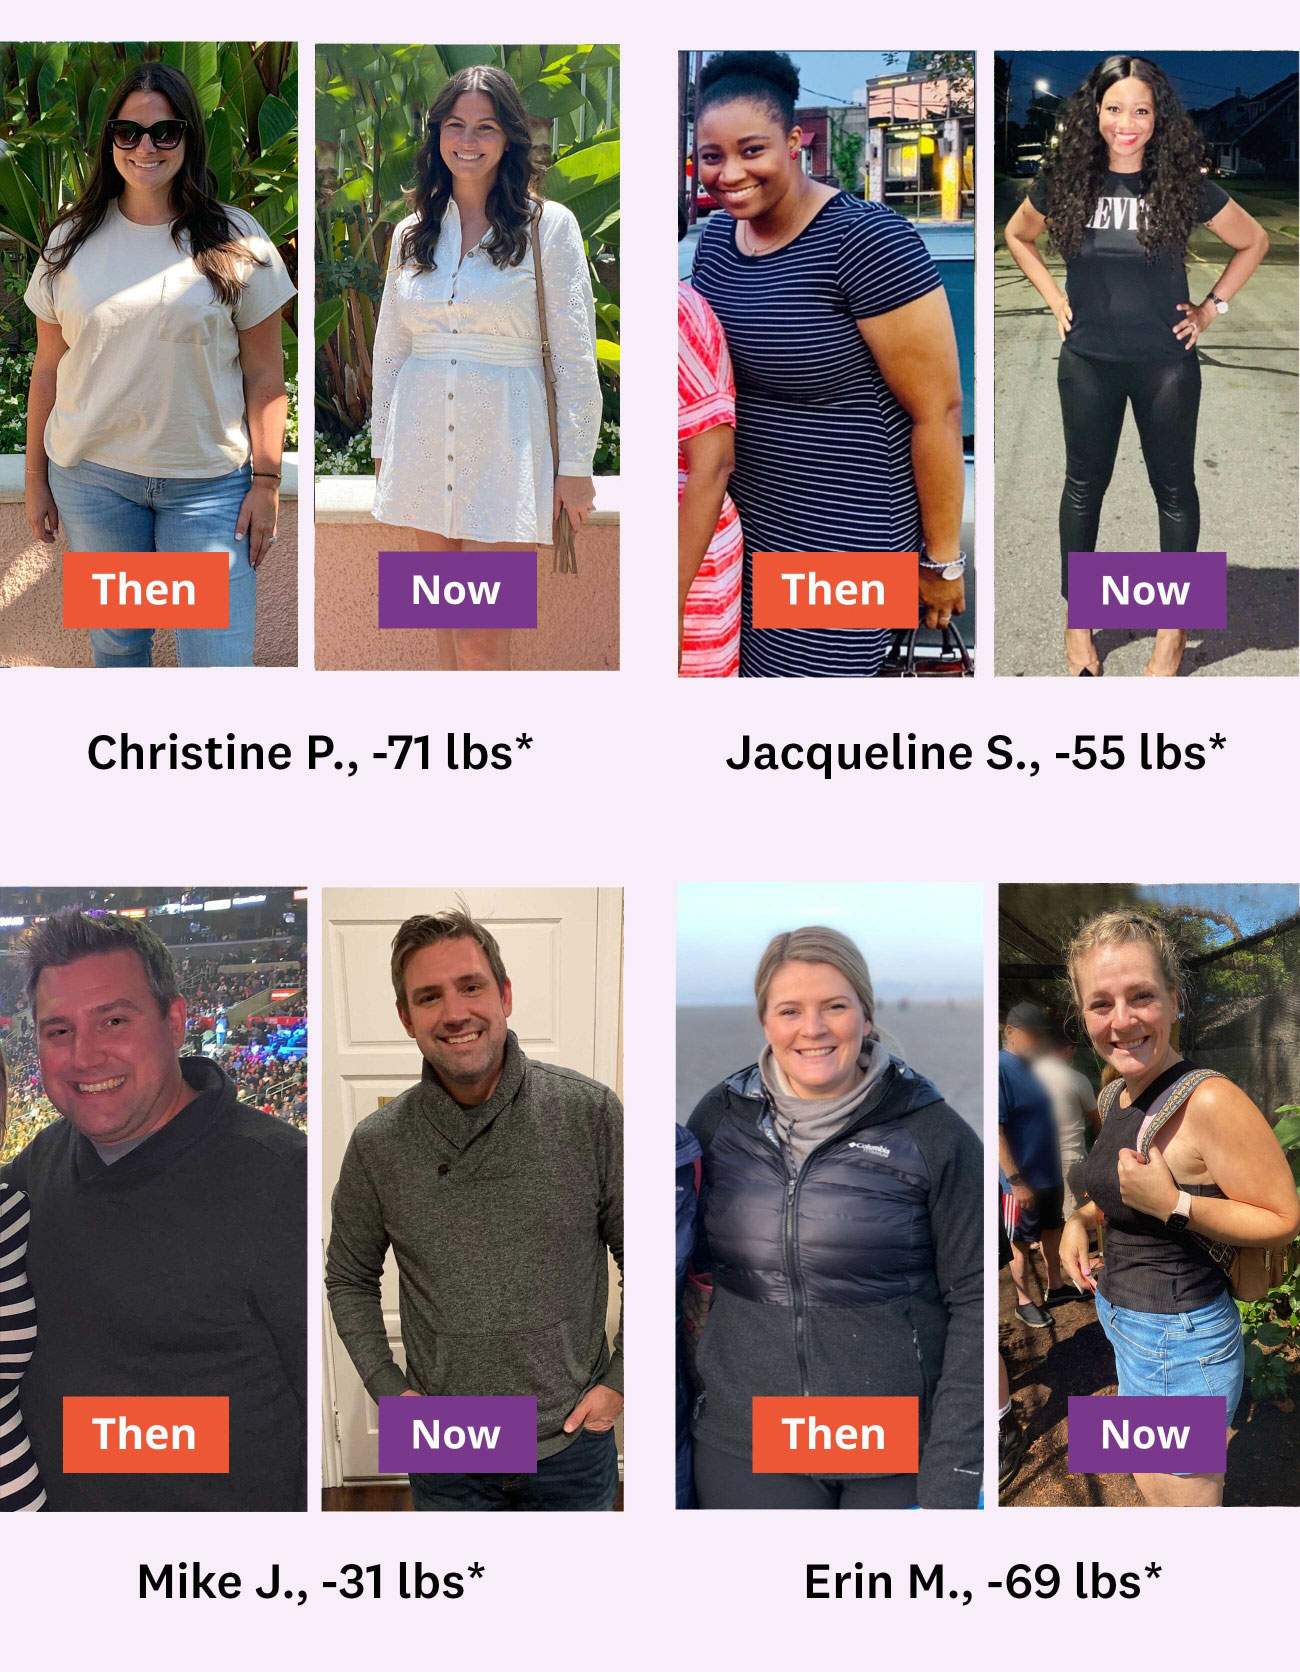 A grid featuring WW members Christine P. (lost 71 pounds), Jacqueline S. (lost 55 pounds), Mike J. (lost 31 pounds), and Erin M. (lost 69 pounds).